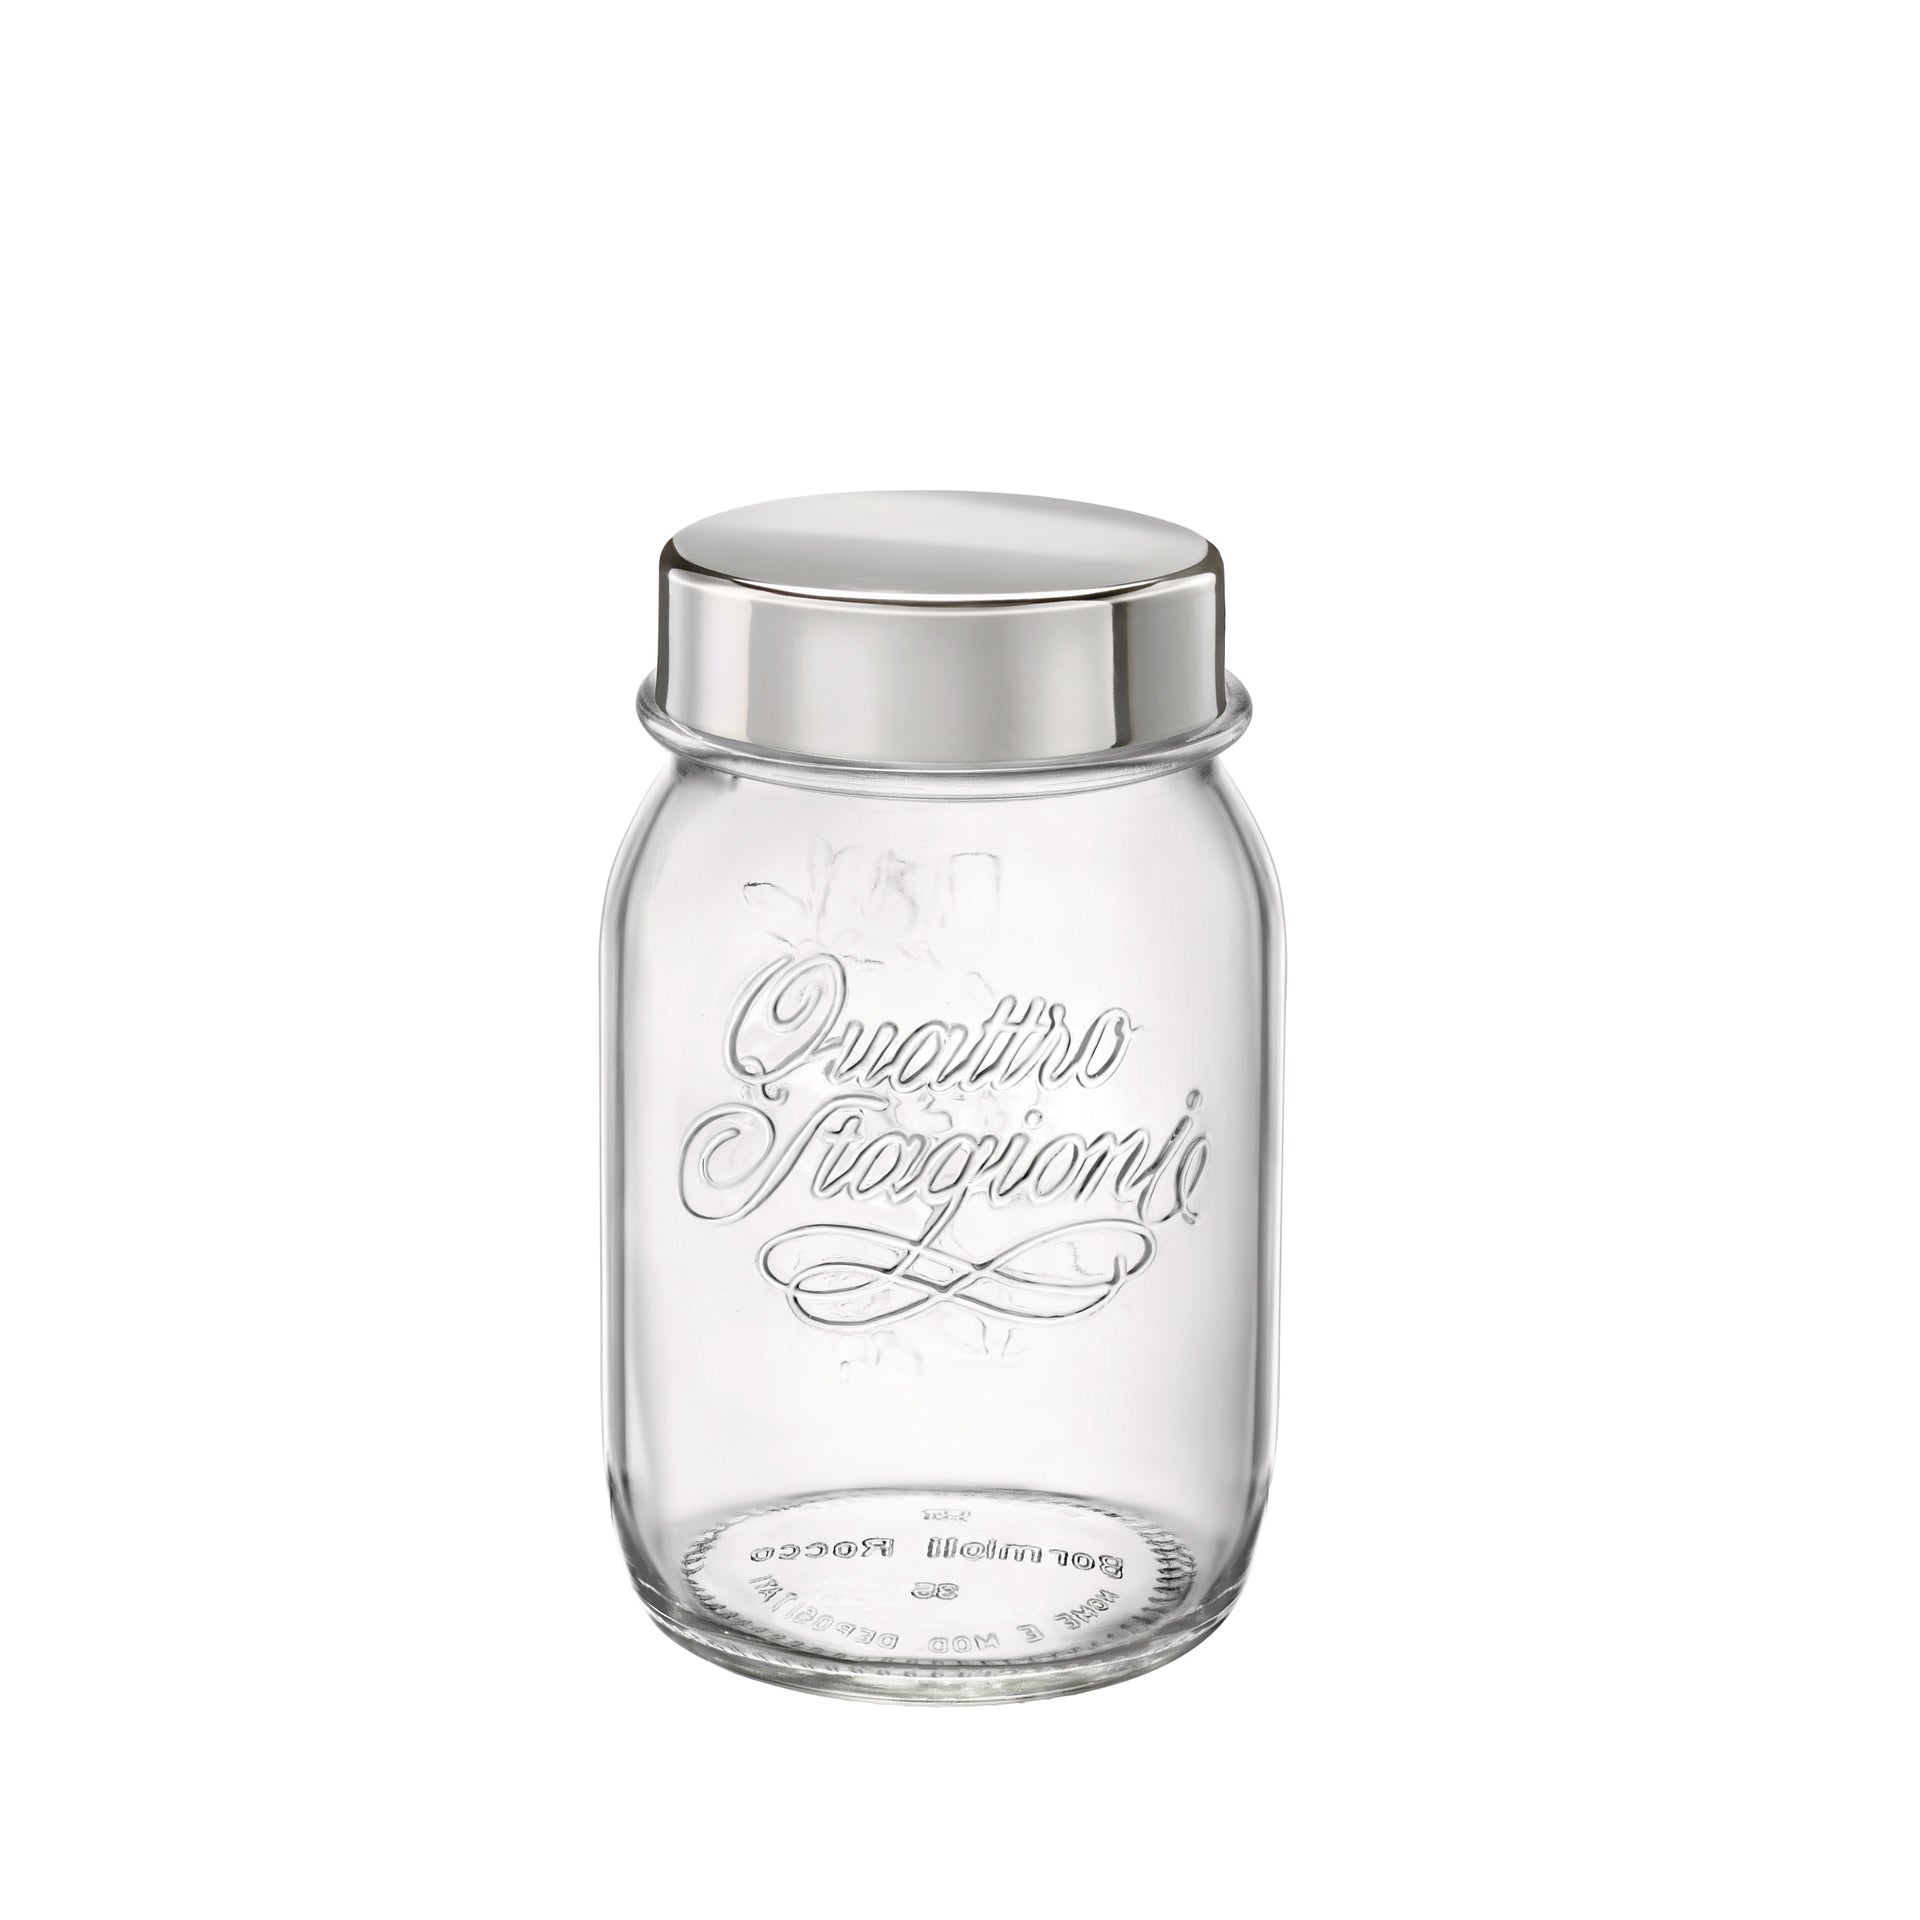 Quattro Stagioni 17 oz. Jar with Stainless Steel Lid (Set of 12)